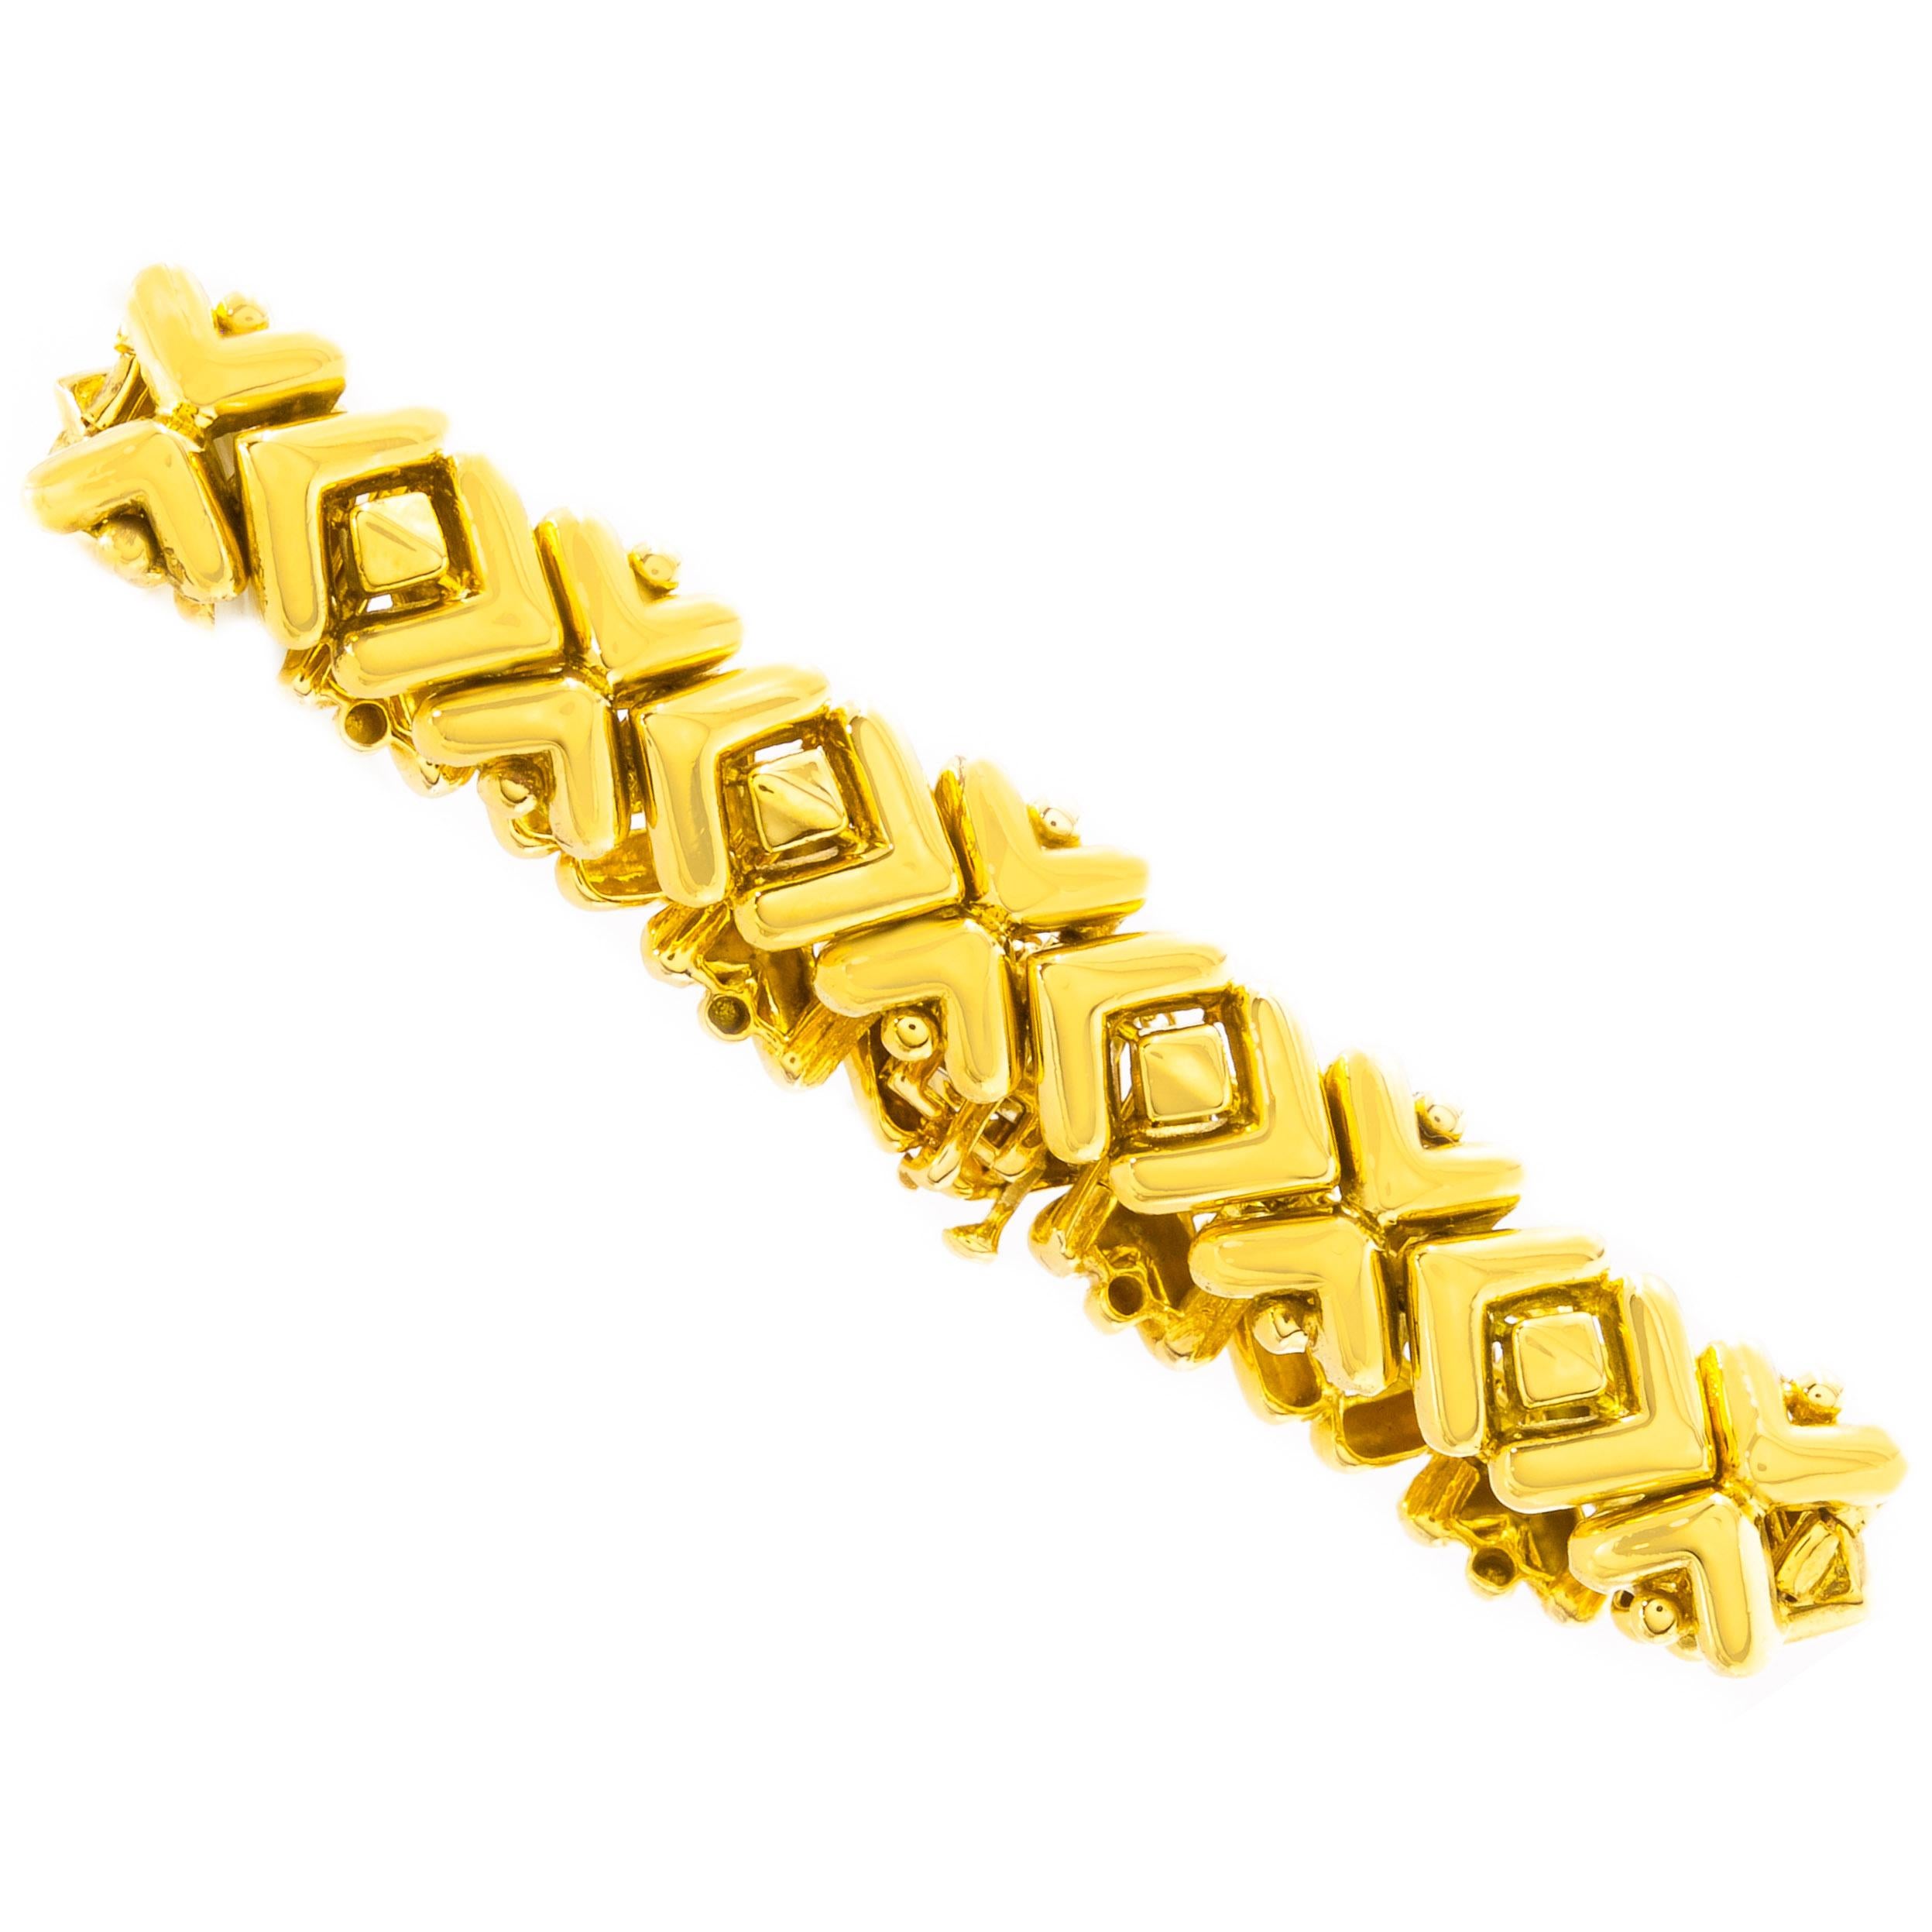 An exquisite work of art, this finely made bracelet features a series of geometric bracket forms simulating a repeating X and O. These are each individually cast and attach with hidden integral pins to allow for the flexible profile without losing